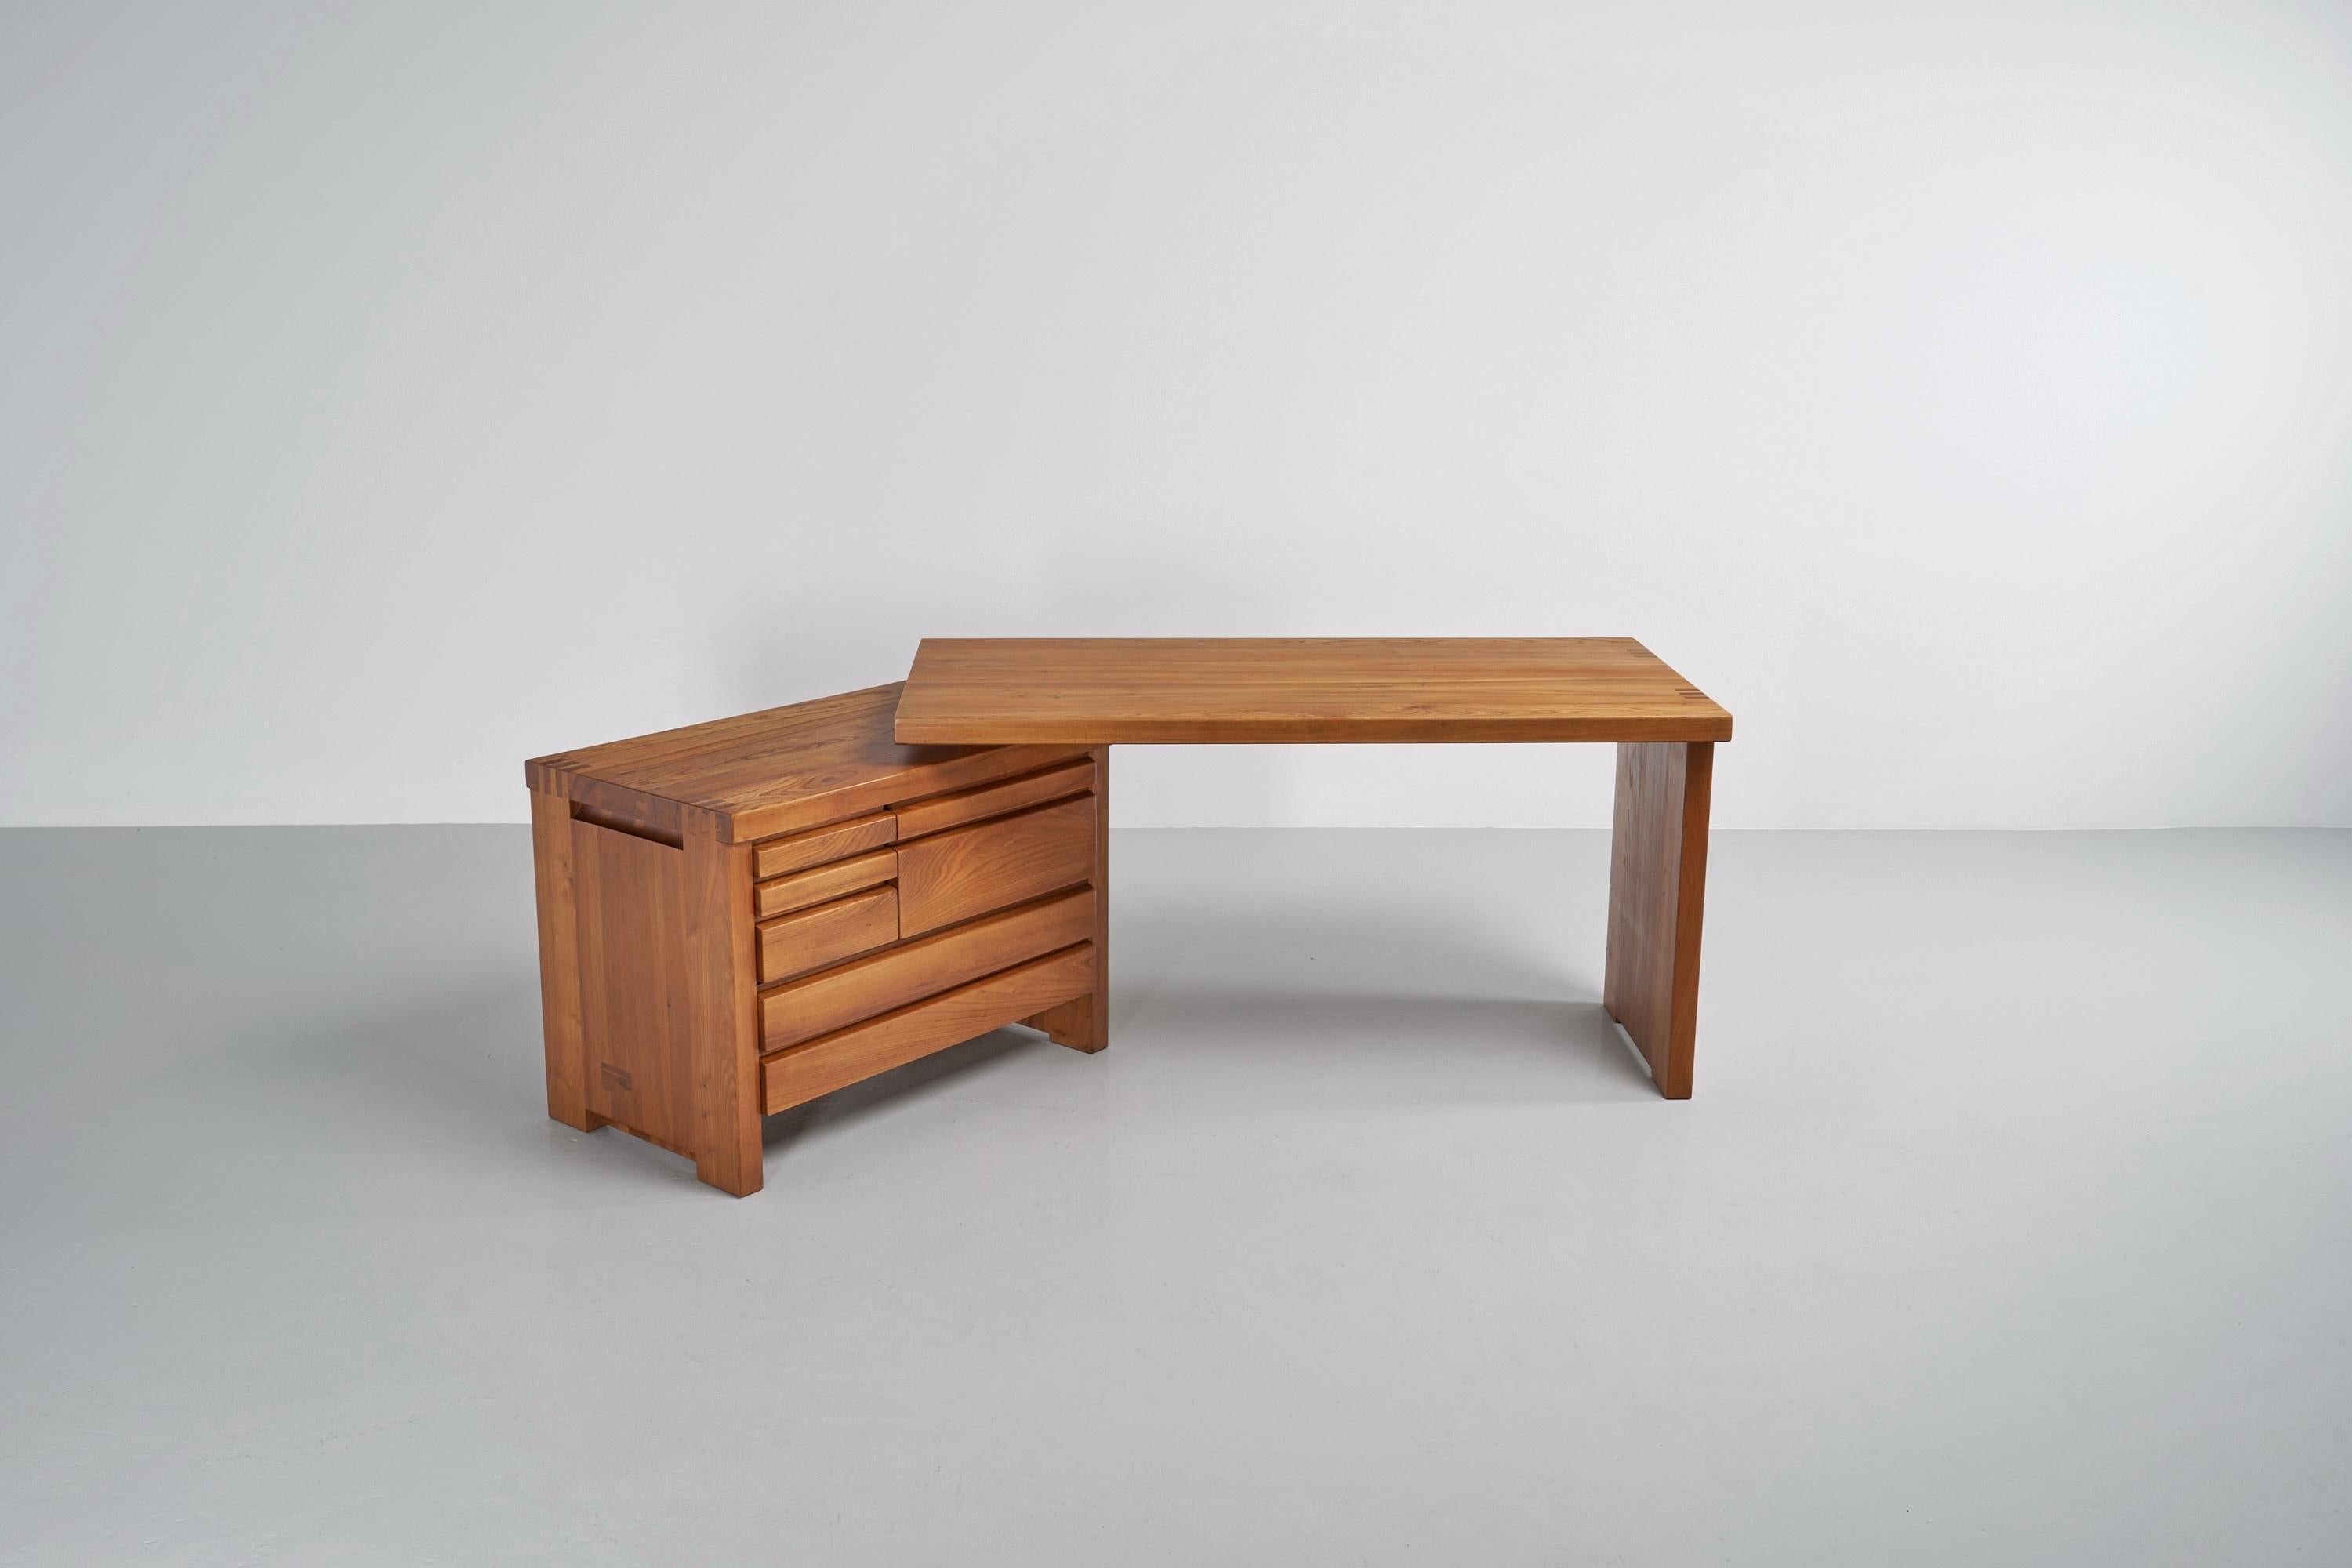 Striking model B19 desk designed by Pierre Chapo and manufactured in his own atelier in Gordes, France 1960. This executive desk is one of the most versatile designs by Chapo. Although its beauty lies in the simplicity of the design, it has